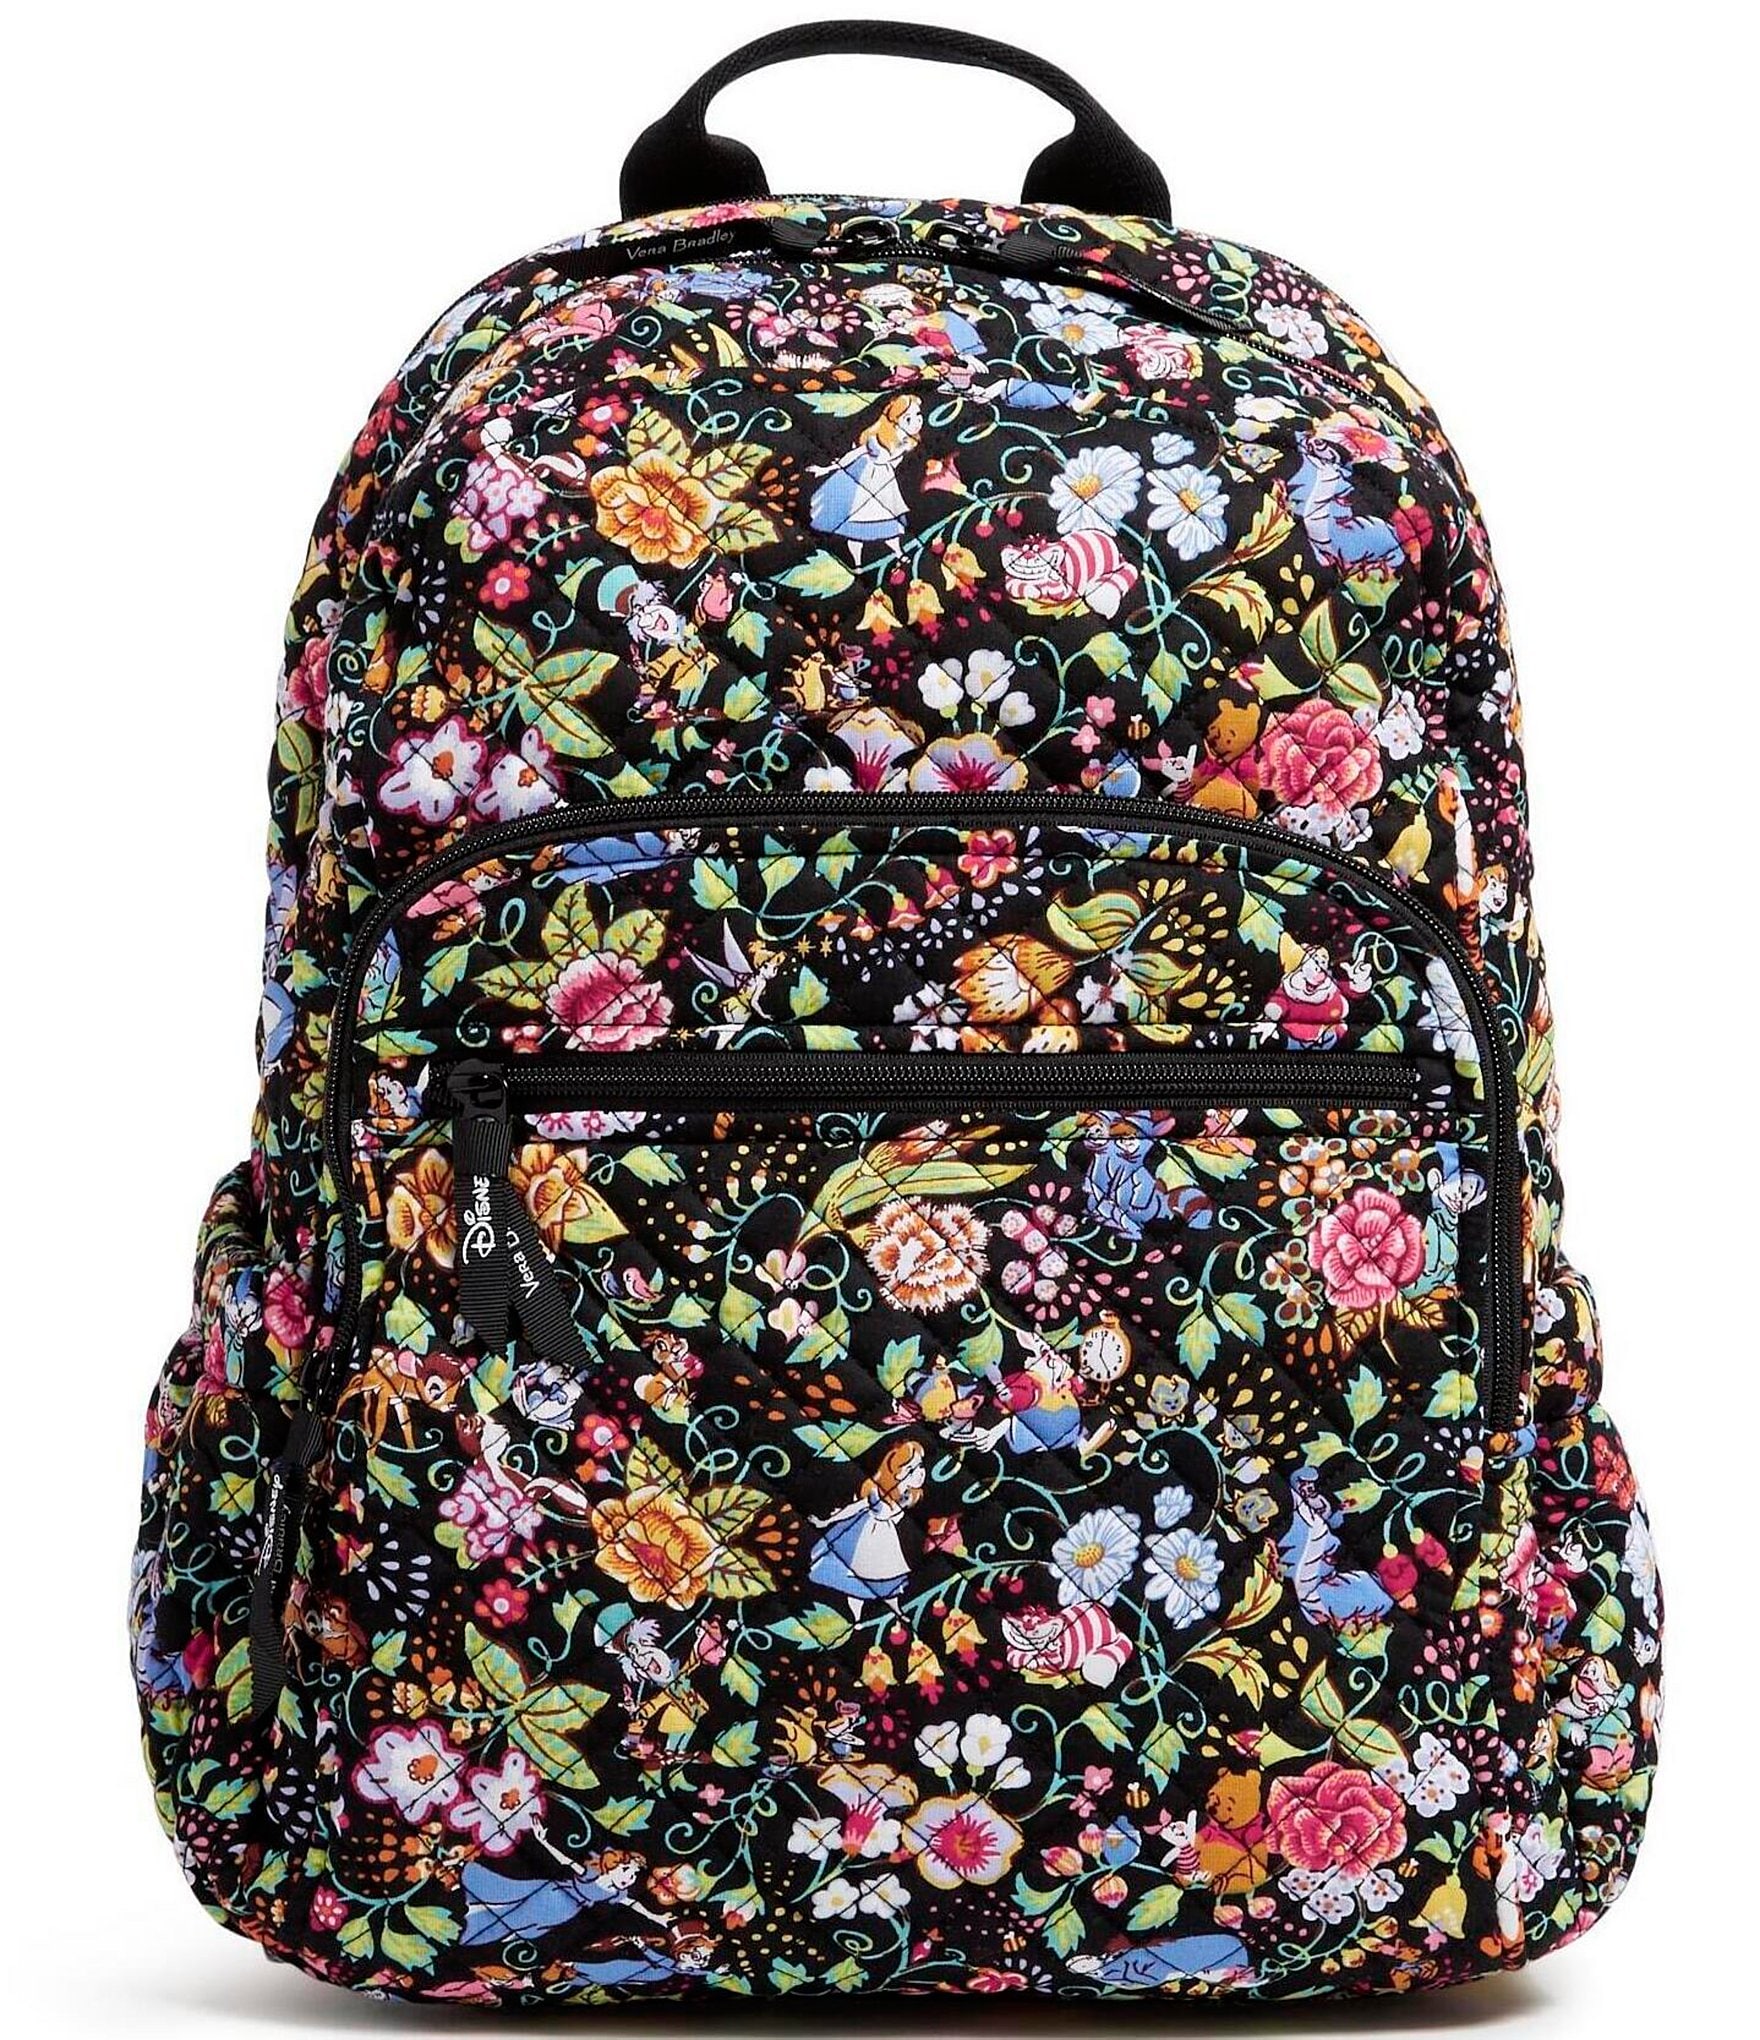 https://dimg.dillards.com/is/image/DillardsZoom/zoom/vera-bradley-disney-collection-classics-on-the-green-campus-backpack/00000000_zi_389f1957-eb00-4fcd-a99d-10e988a4aed7.jpg